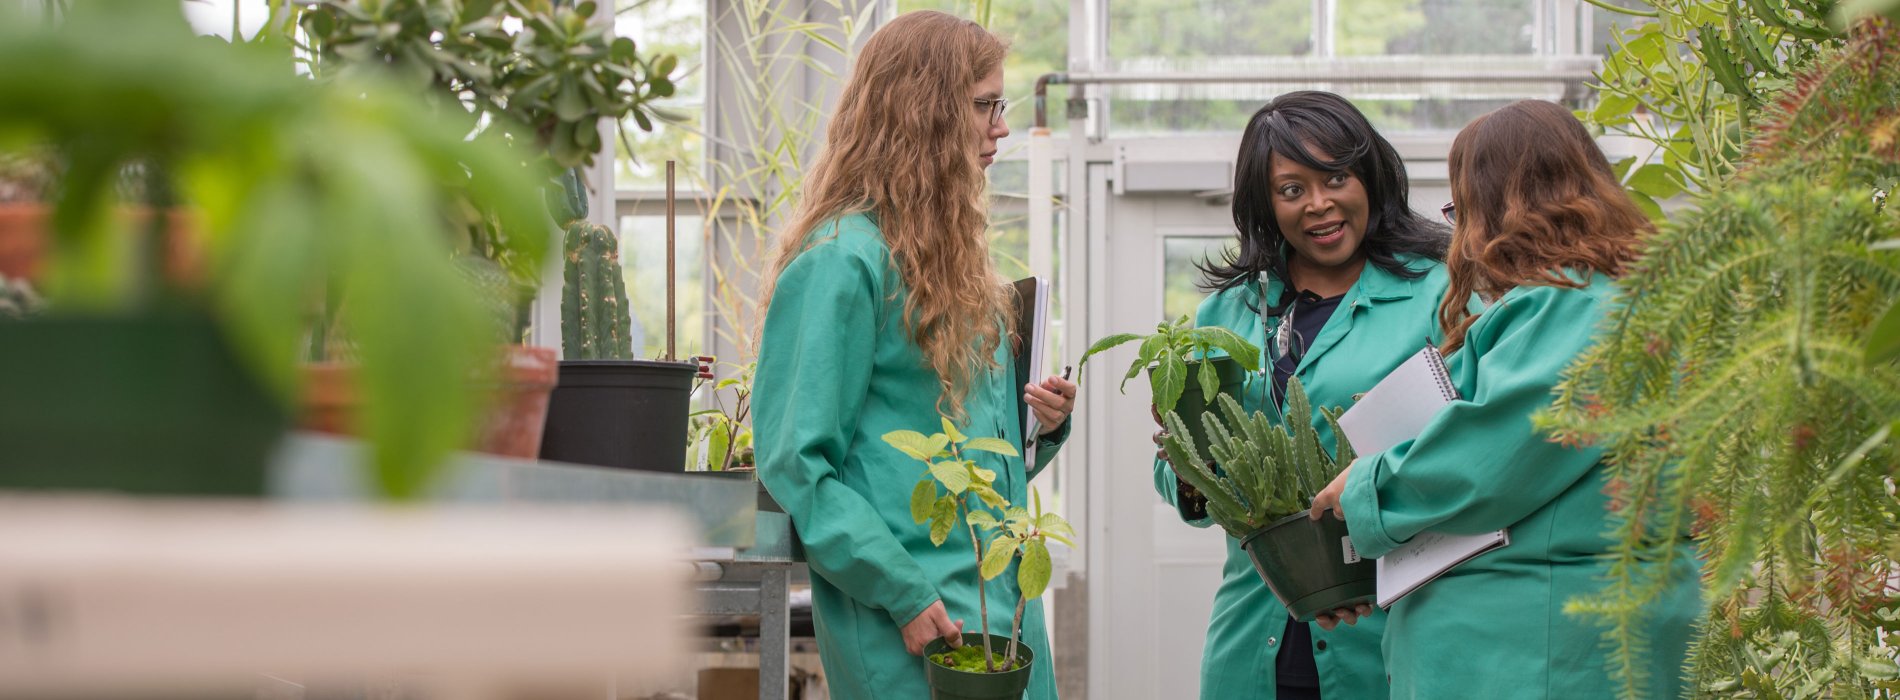 Three women in green lab coats holding plants and notebooks talk inside a greenhouse.